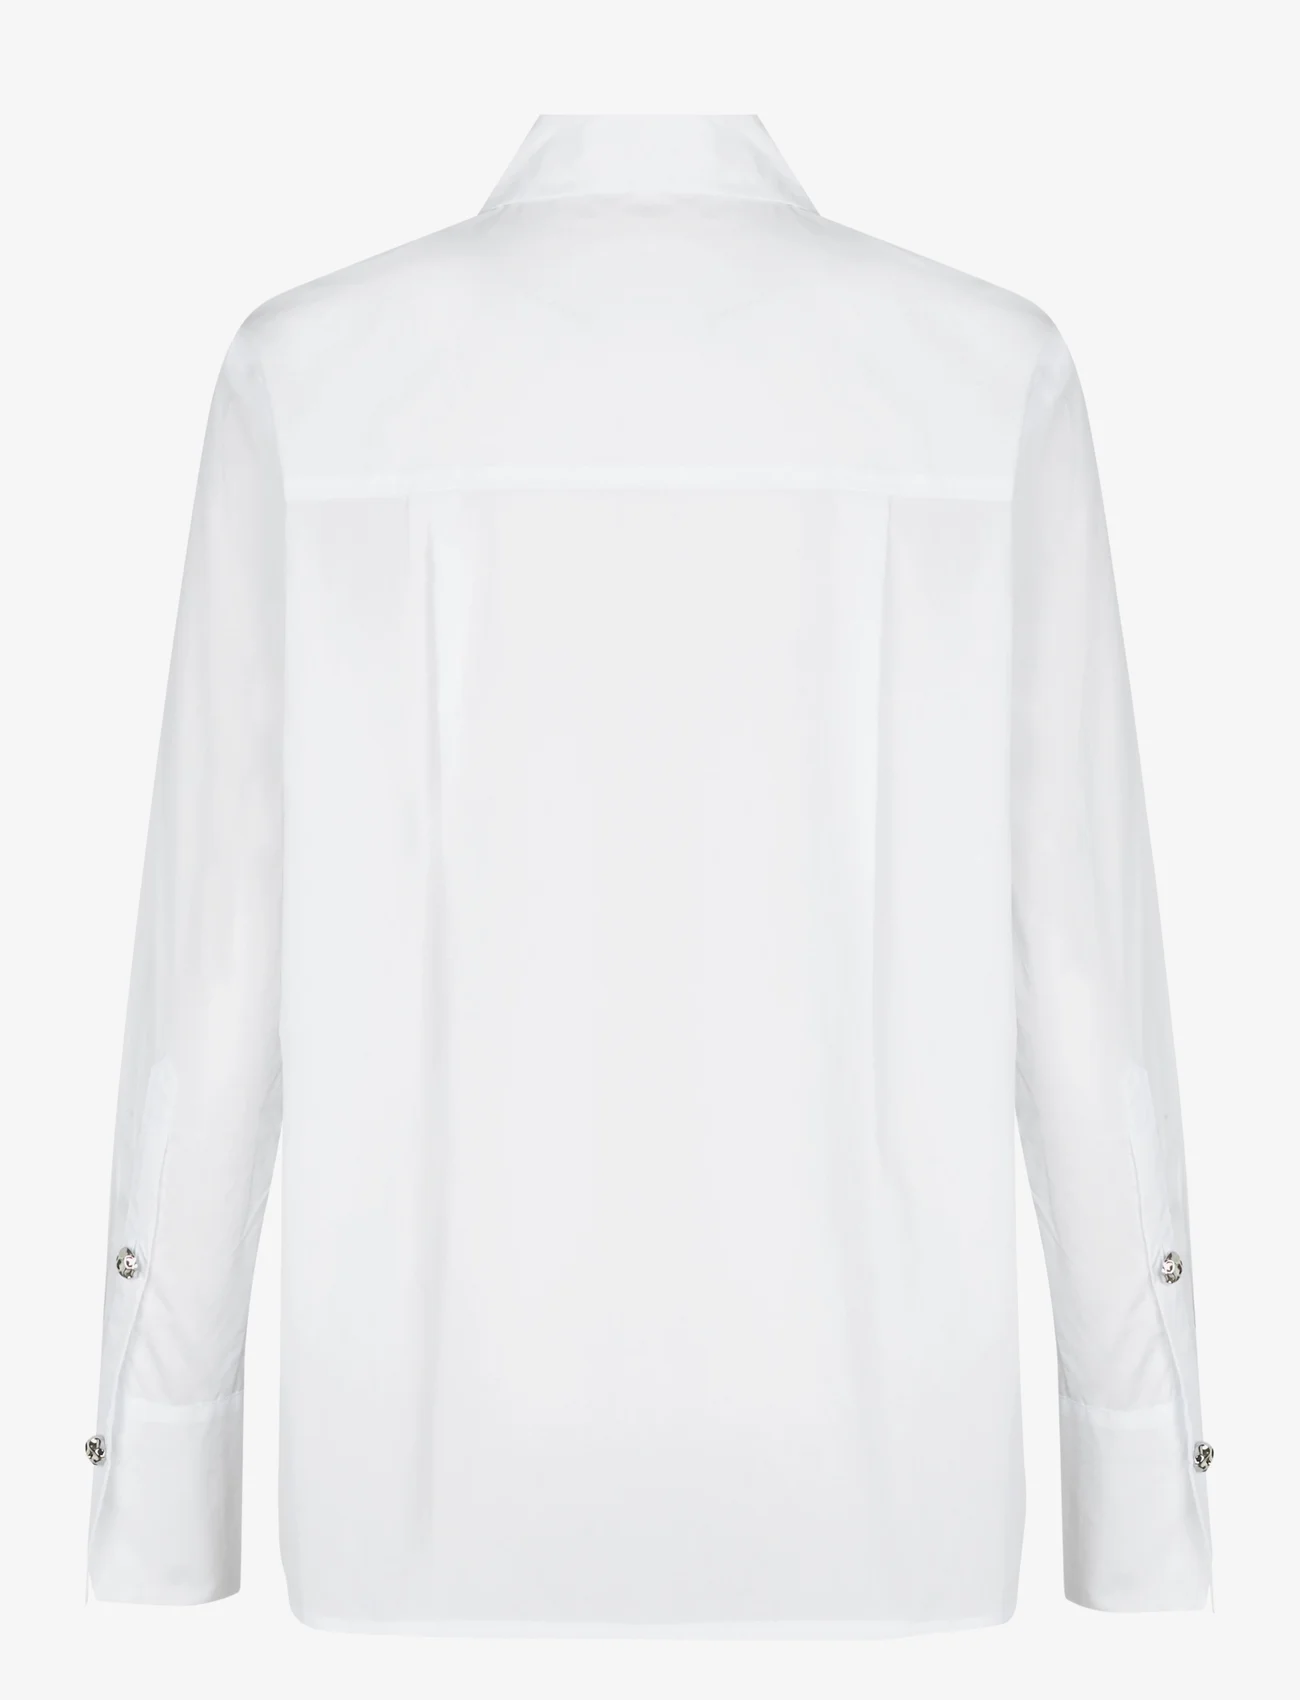 Custommade - Bri Solid - long-sleeved shirts - 001 bright white - 1